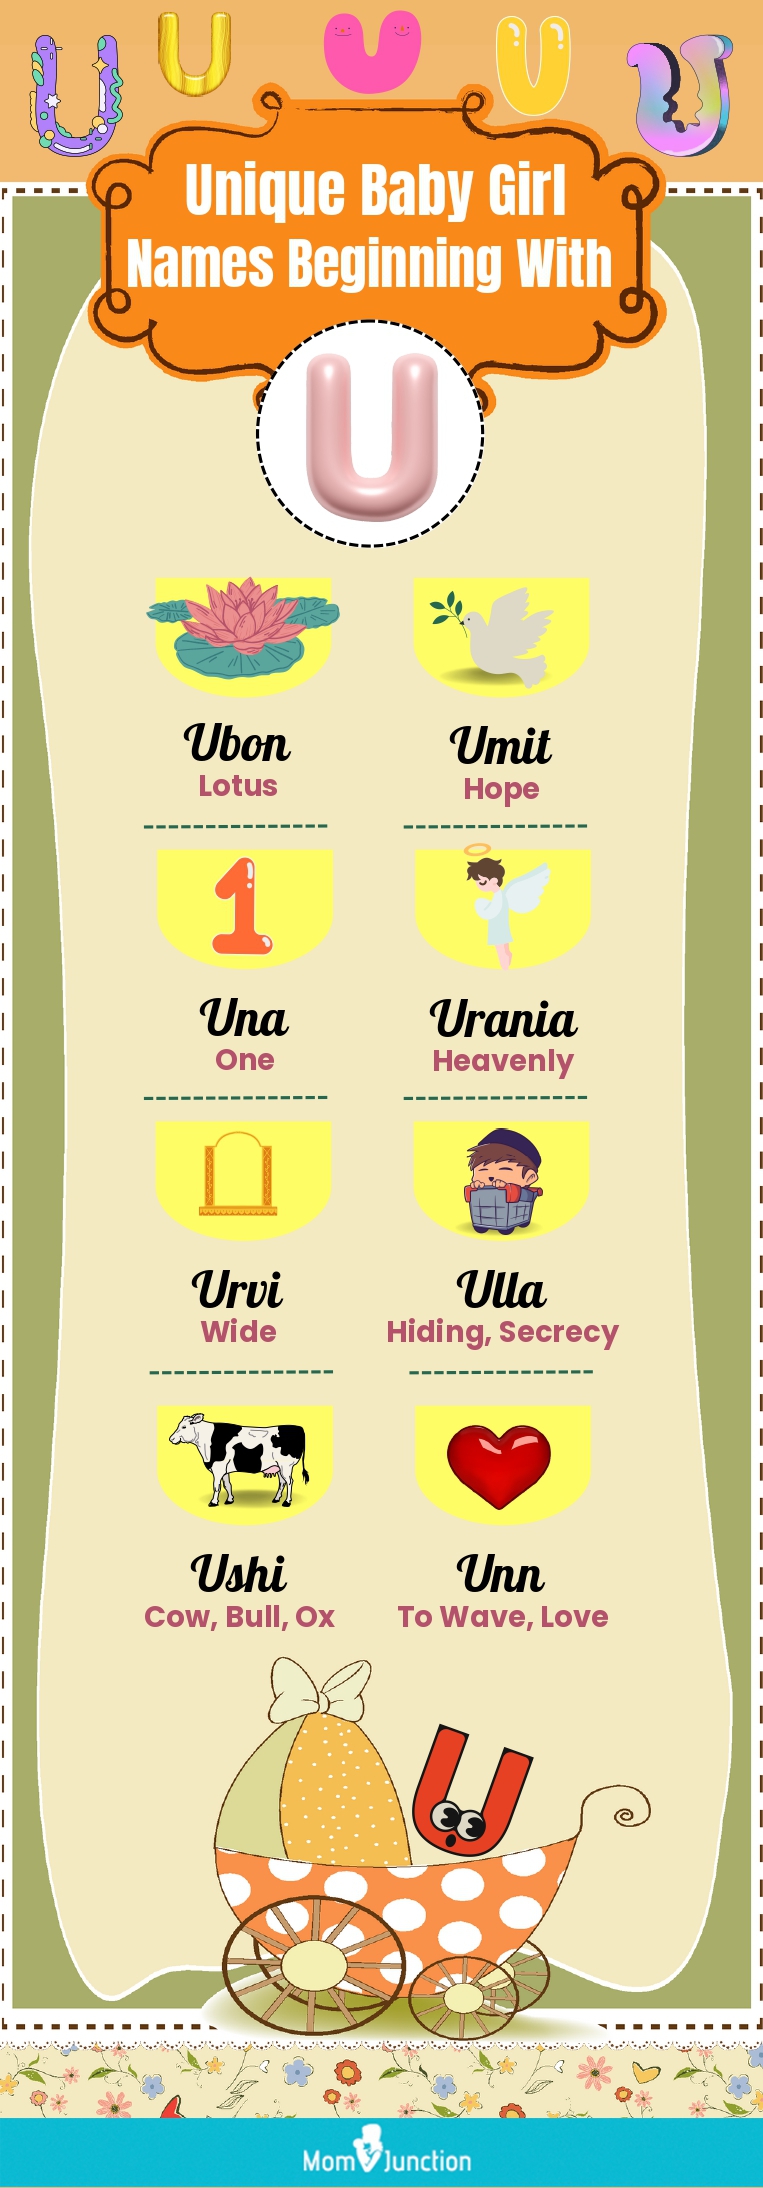 unique baby girl names beginning with u (infographic)